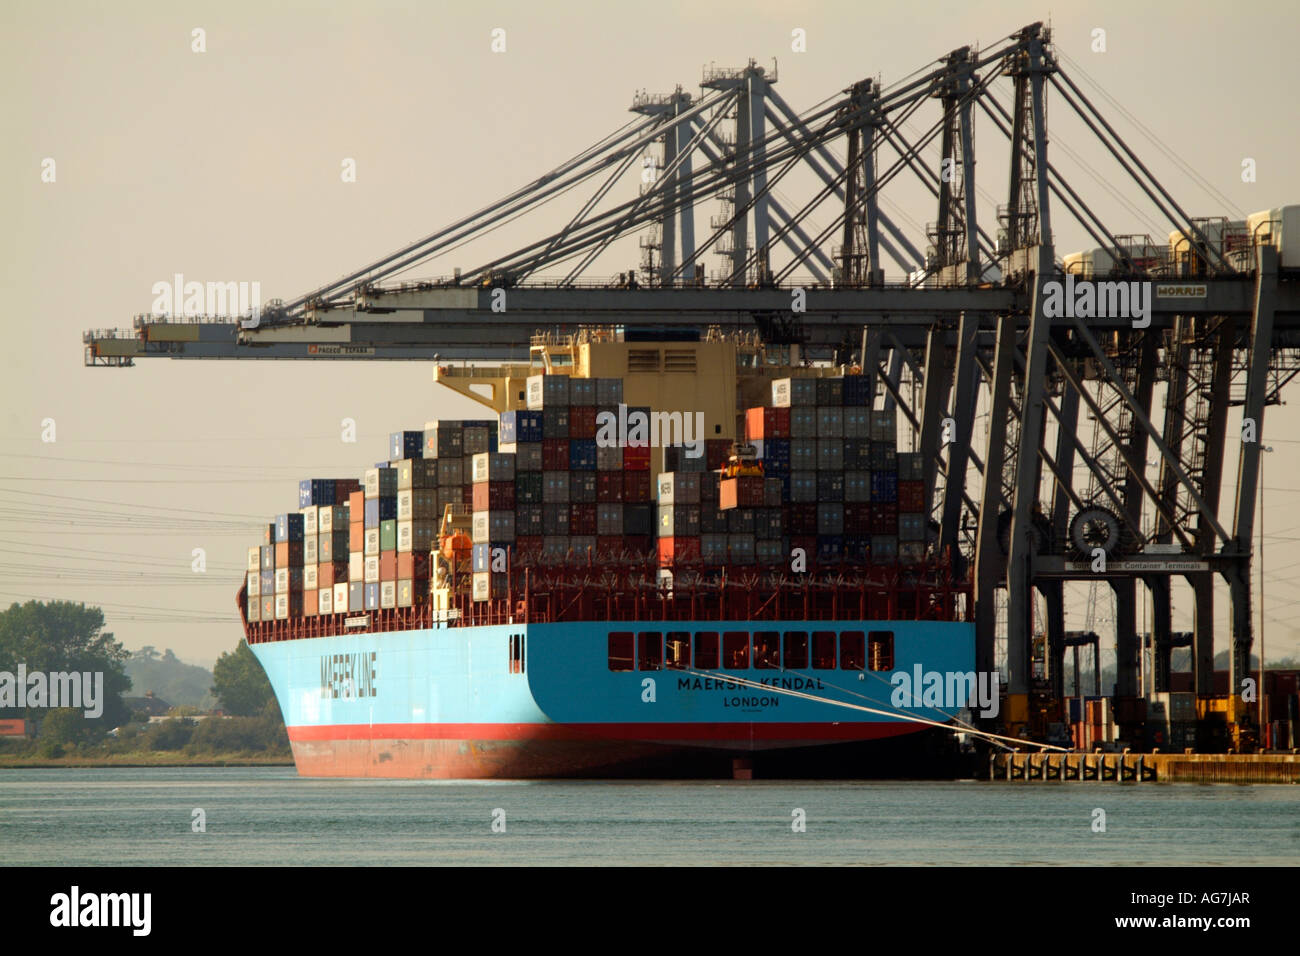 SCT Southampton Container Terminal Maersk Kendal Container Ship in Port Stock Photo